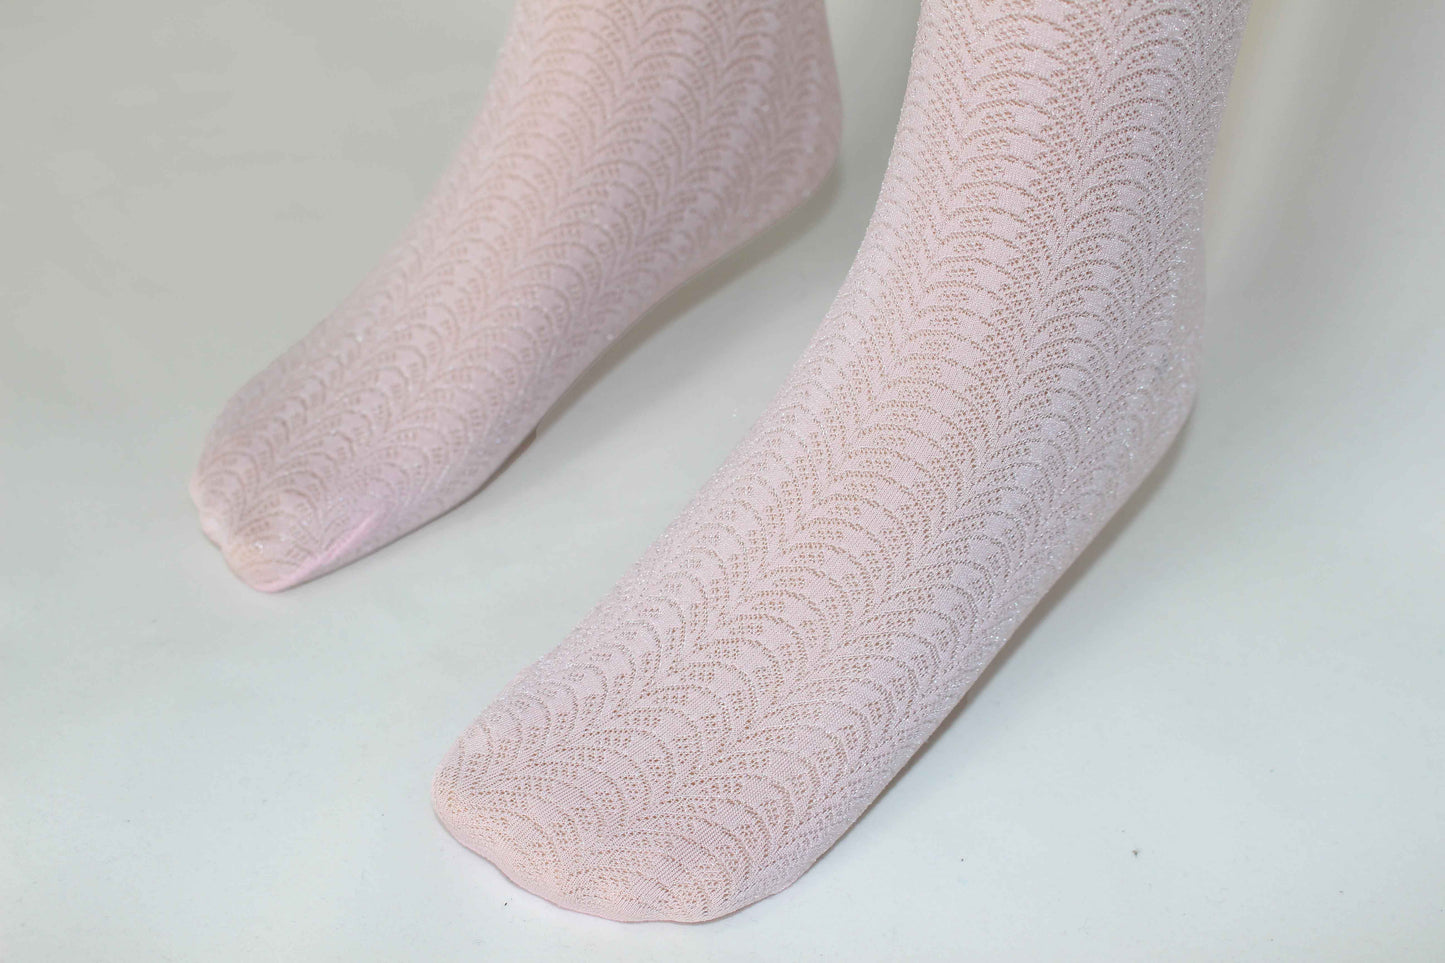 Omsa Serenella Delice Collant - Light baby pink / rosa semi opaque Kid's fashion tights with a woven circular linear lace style pattern.